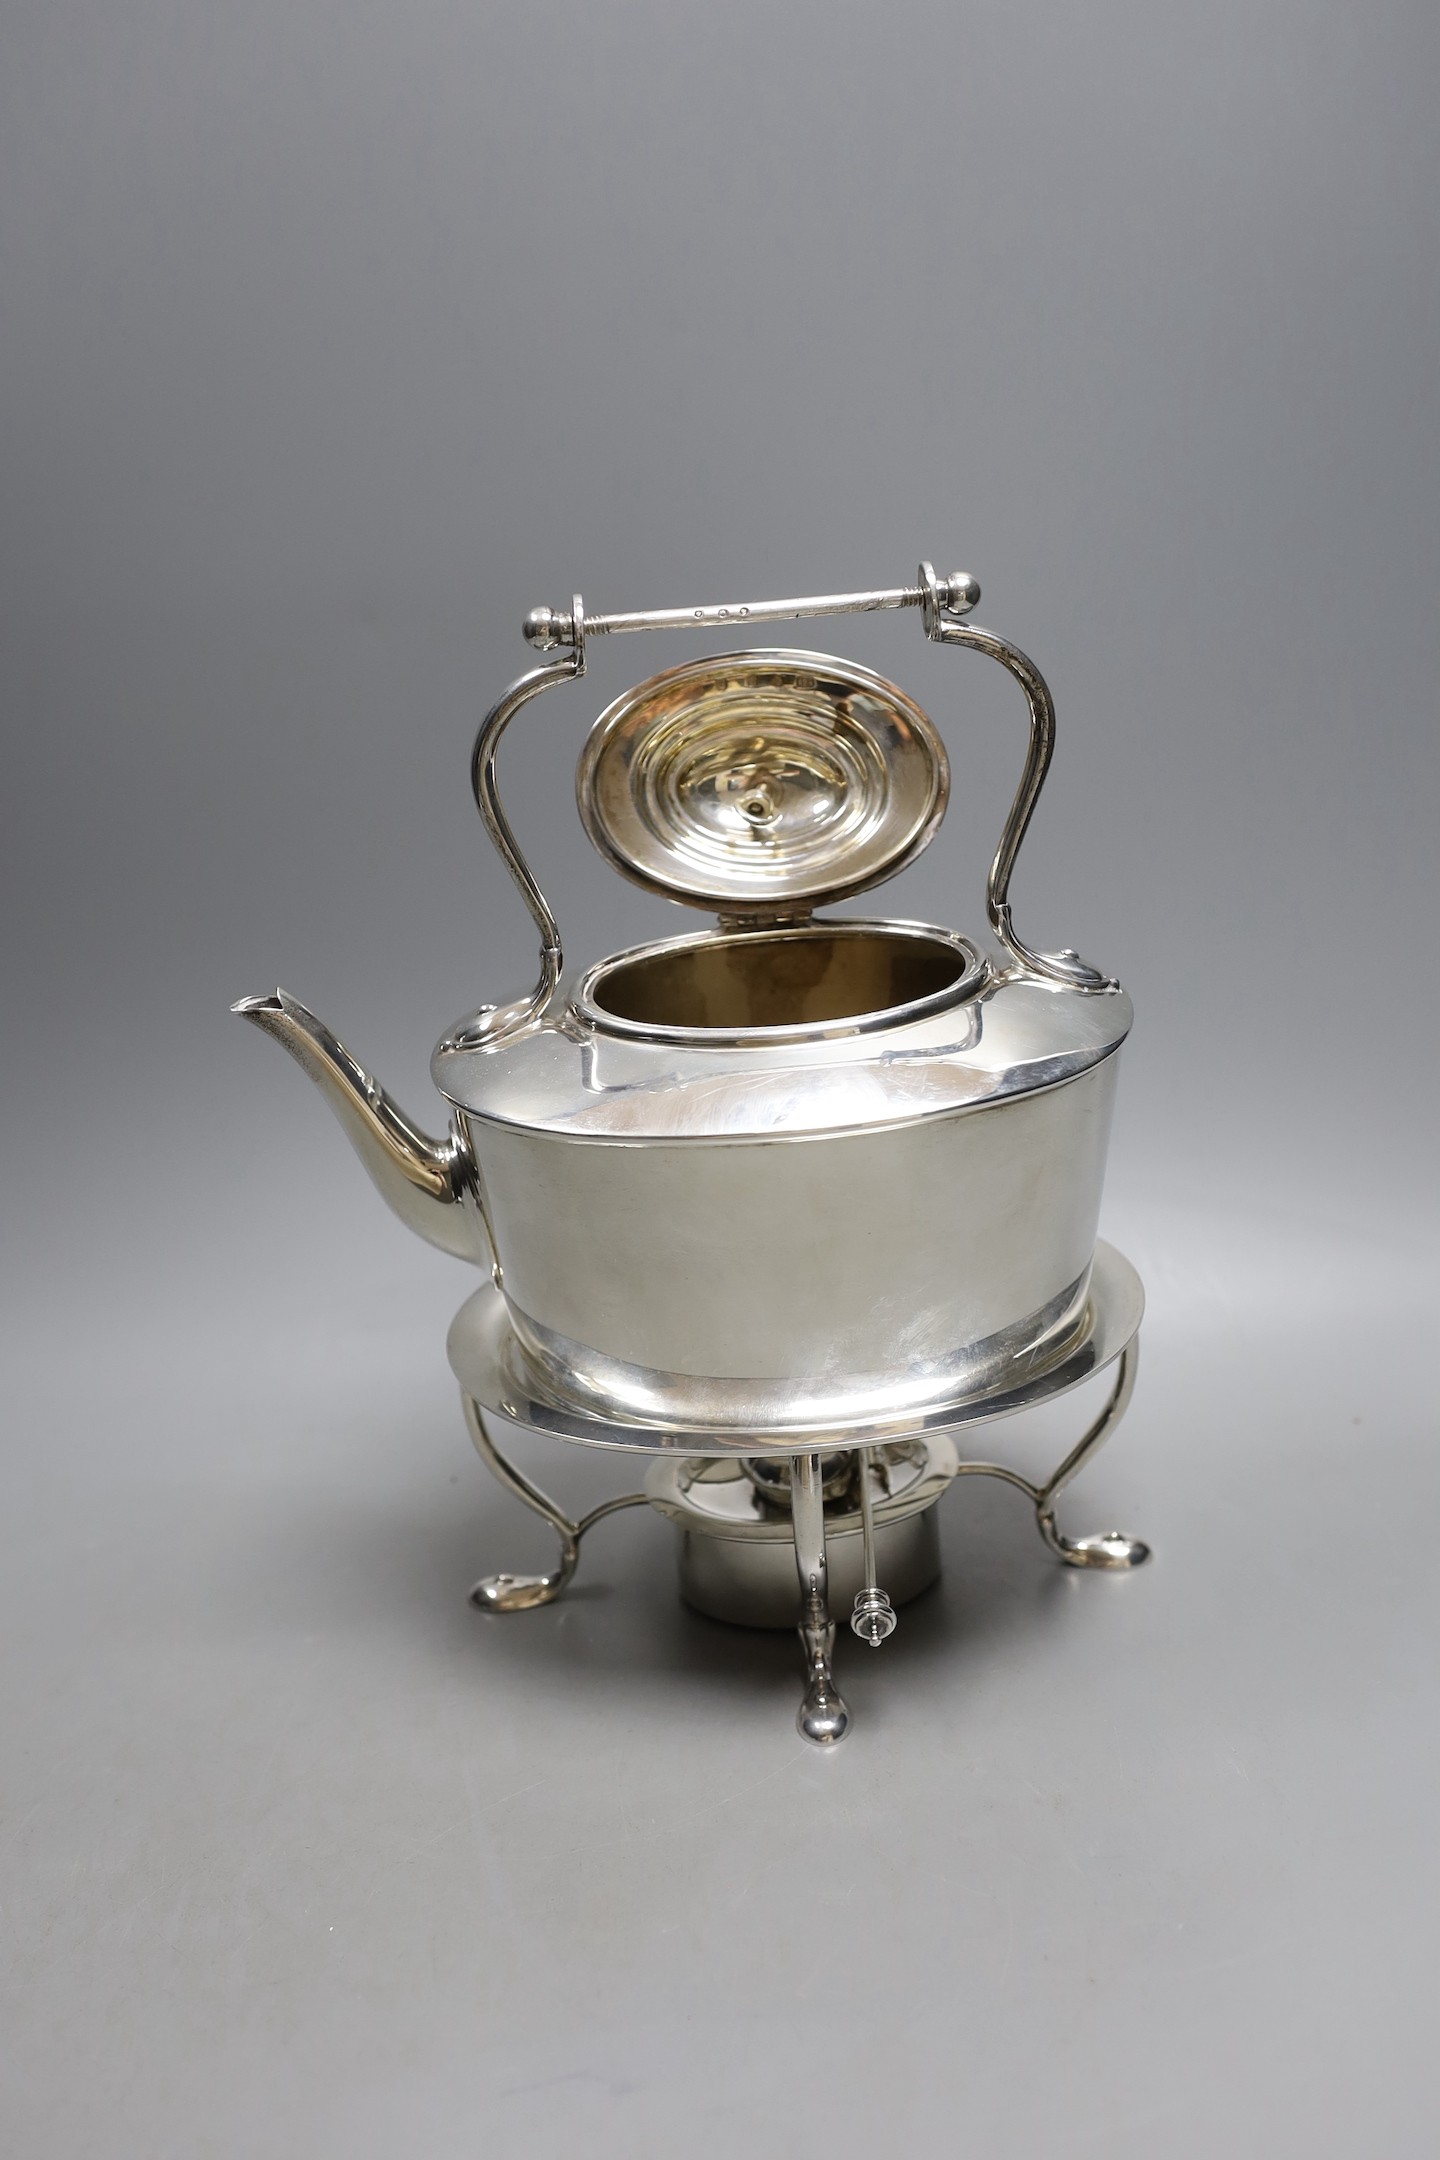 An Edwardian Scottish silver oval tea kettle, on stand with burner, Hamilton & Inches, Edinburgh, 1904, height 25.3, (handle missing), 27.5oz.